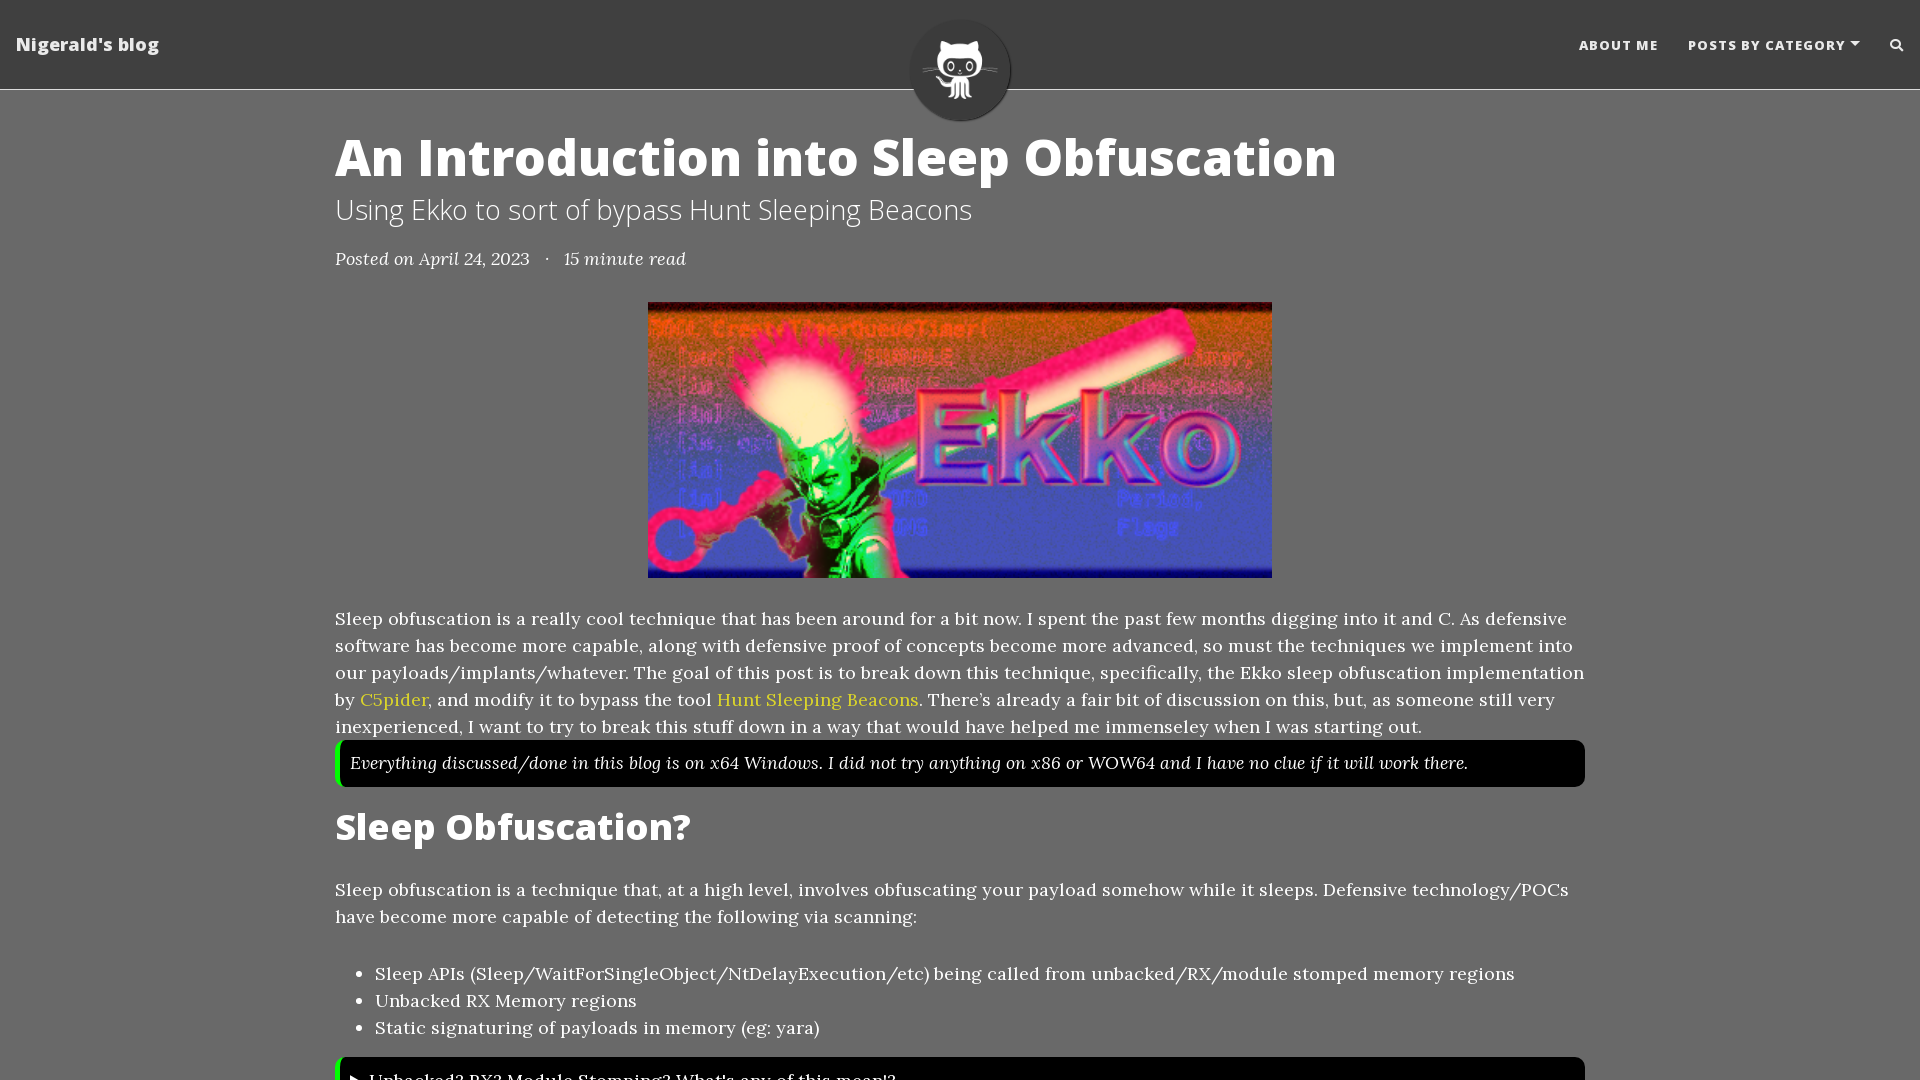 An Introduction into Sleep Obfuscation